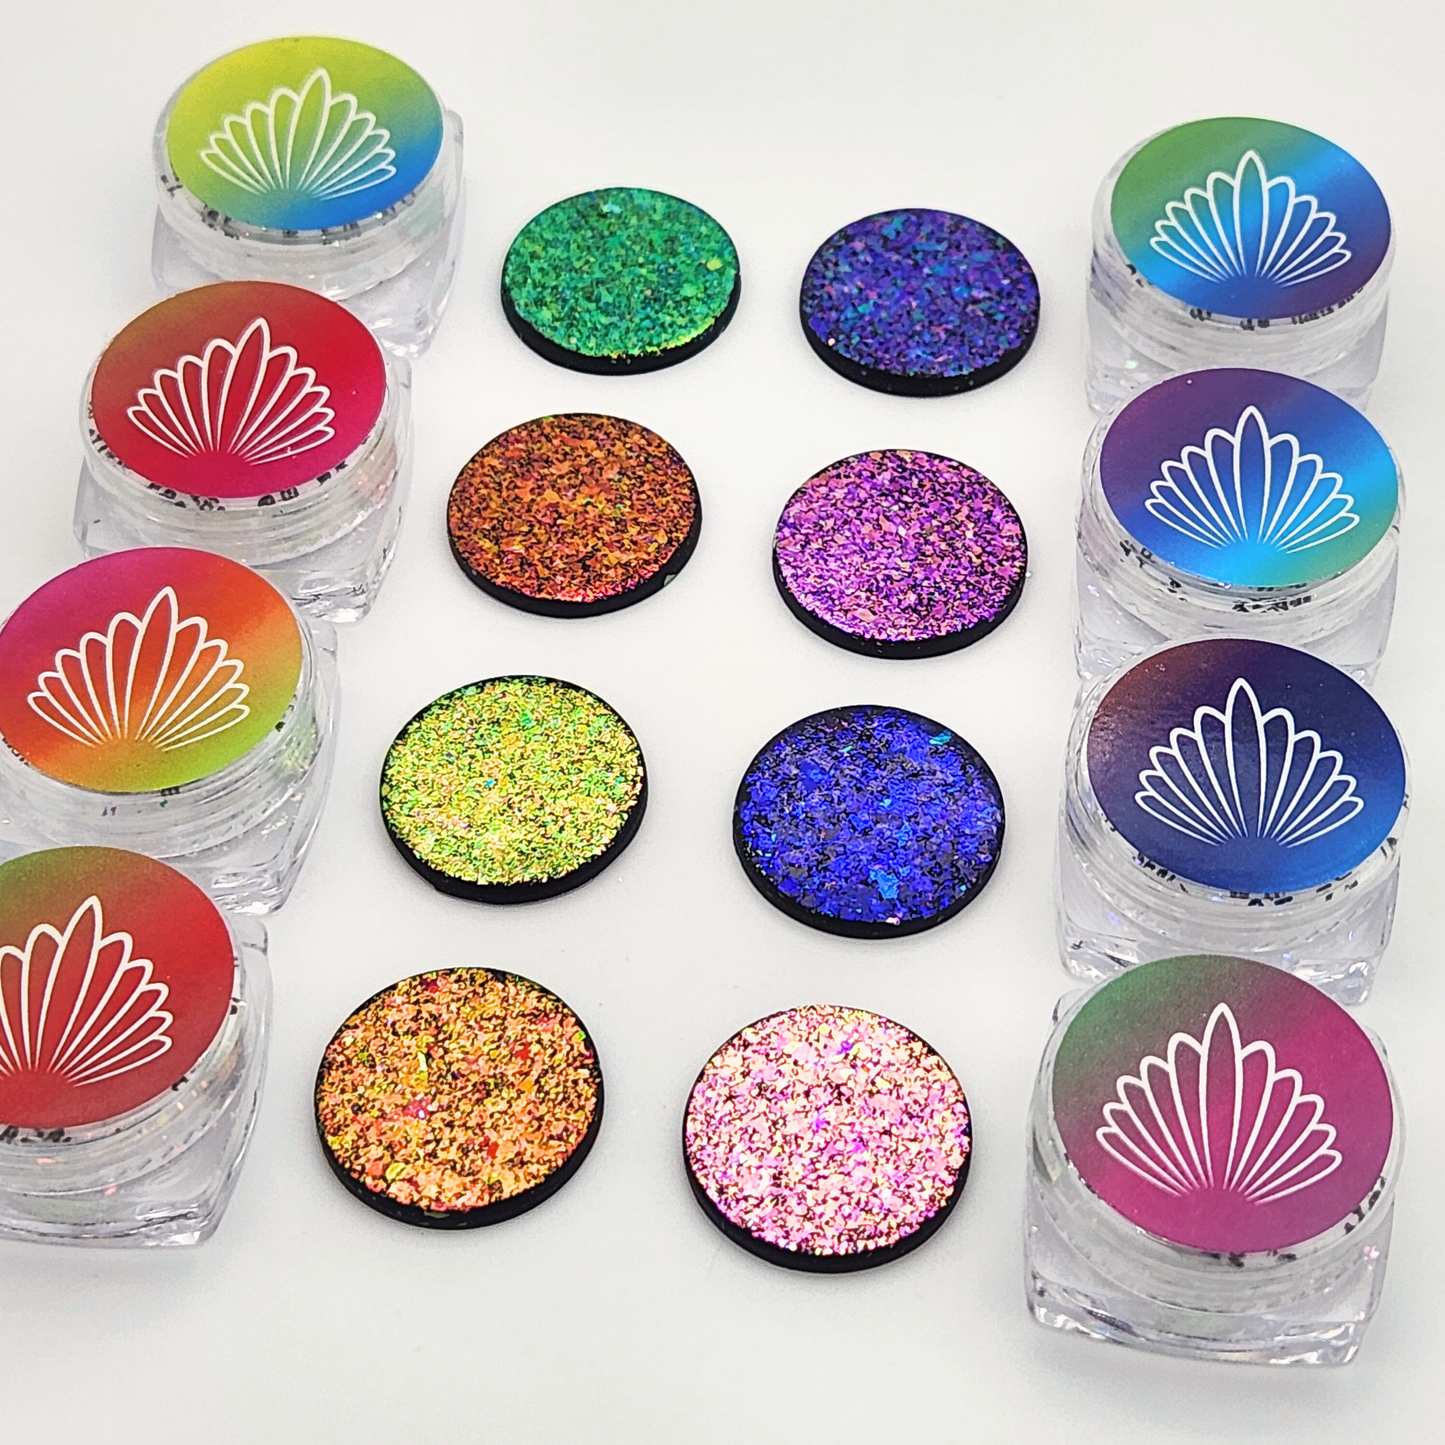 Iridescent Chameleon Opal Flakes - Set of 8 Colors